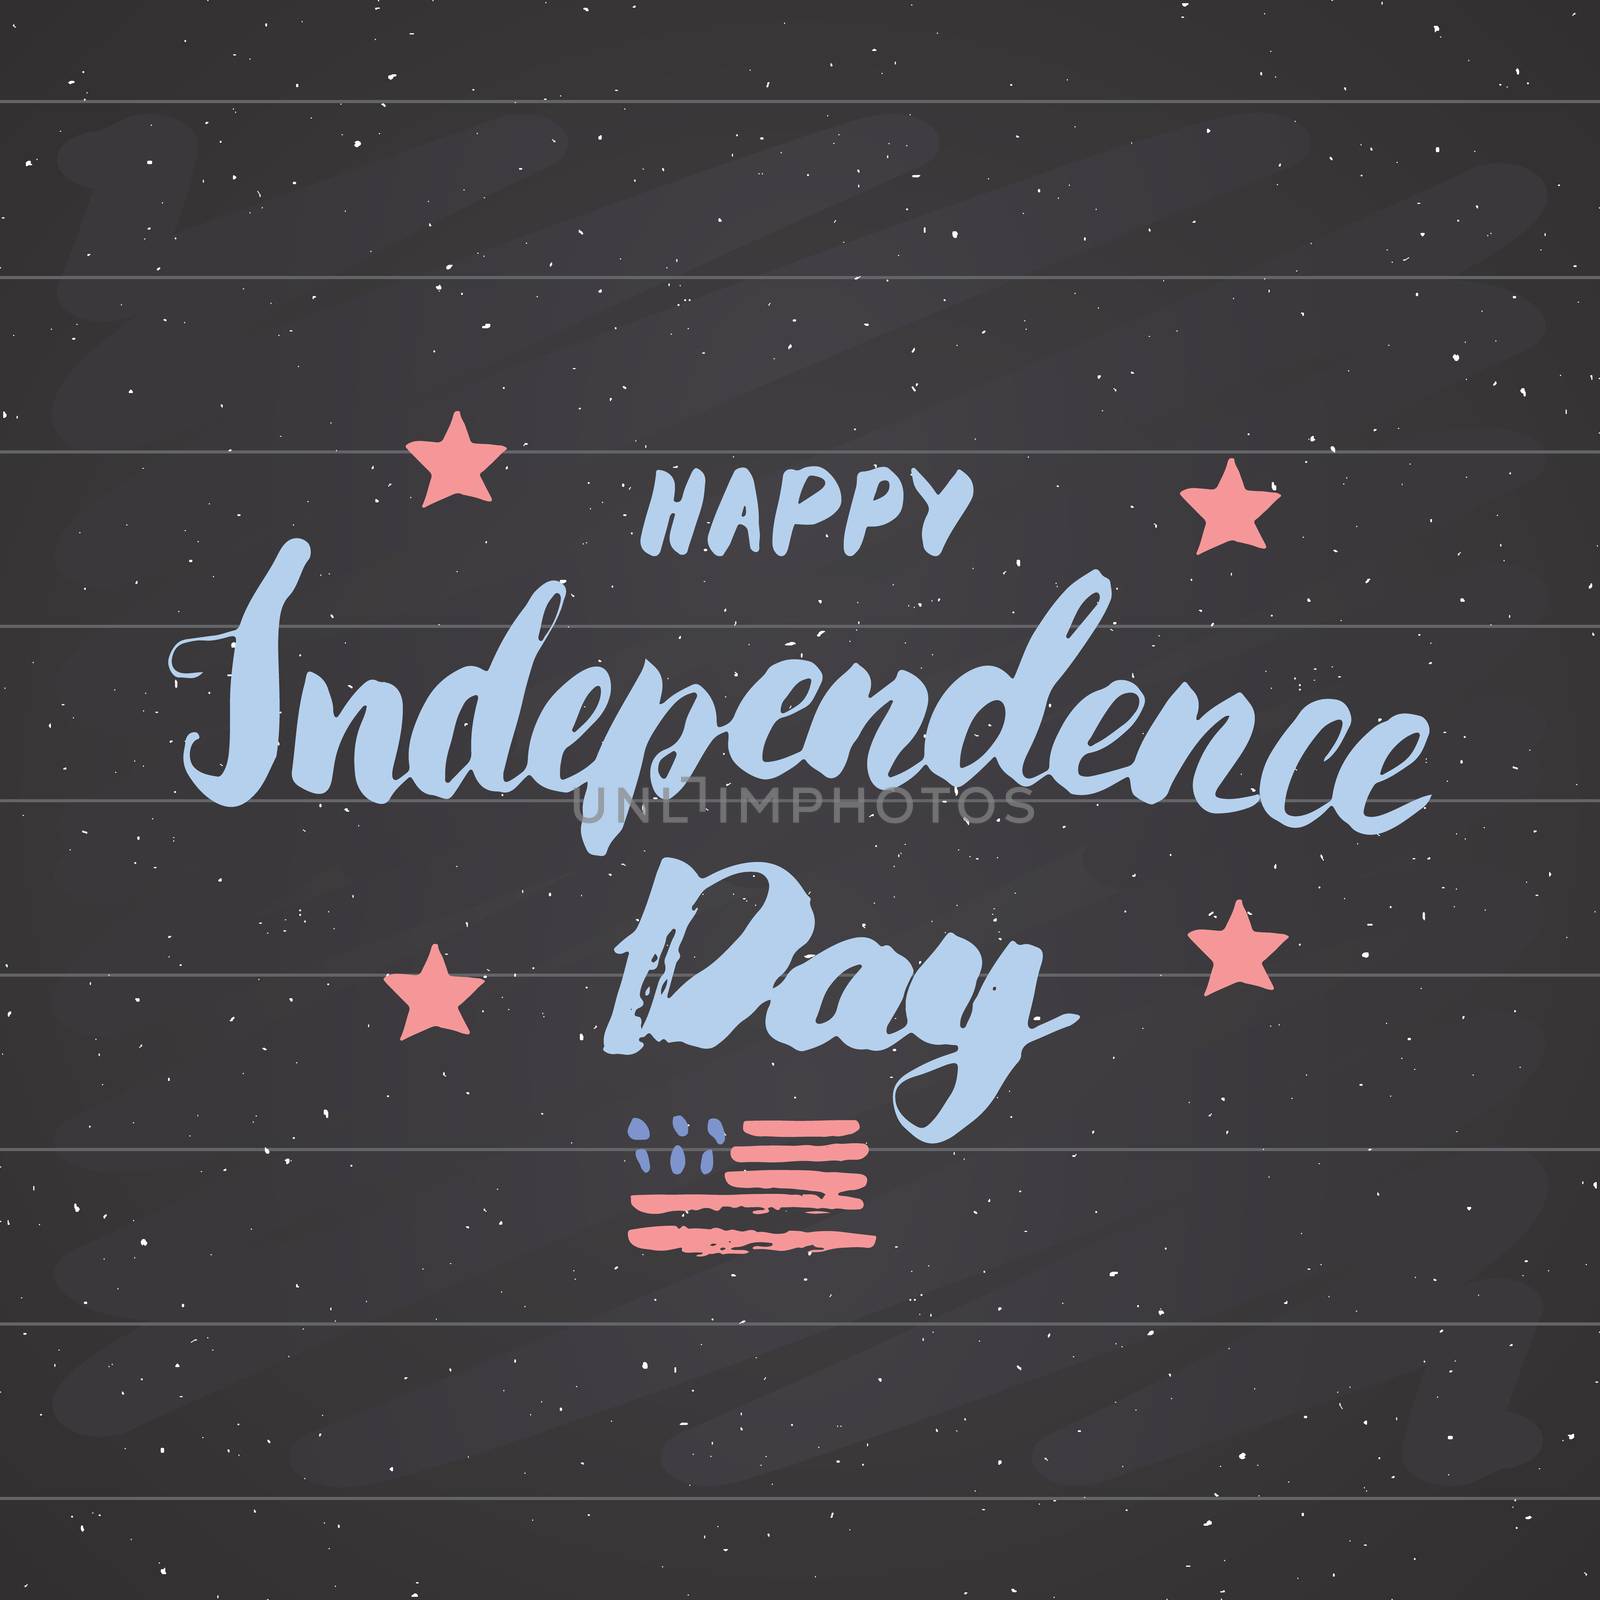 Happy Independence Day Vintage USA greeting card, United States of America celebration. Hand lettering, american holiday grunge textured retro design vector illustration on chalkboard